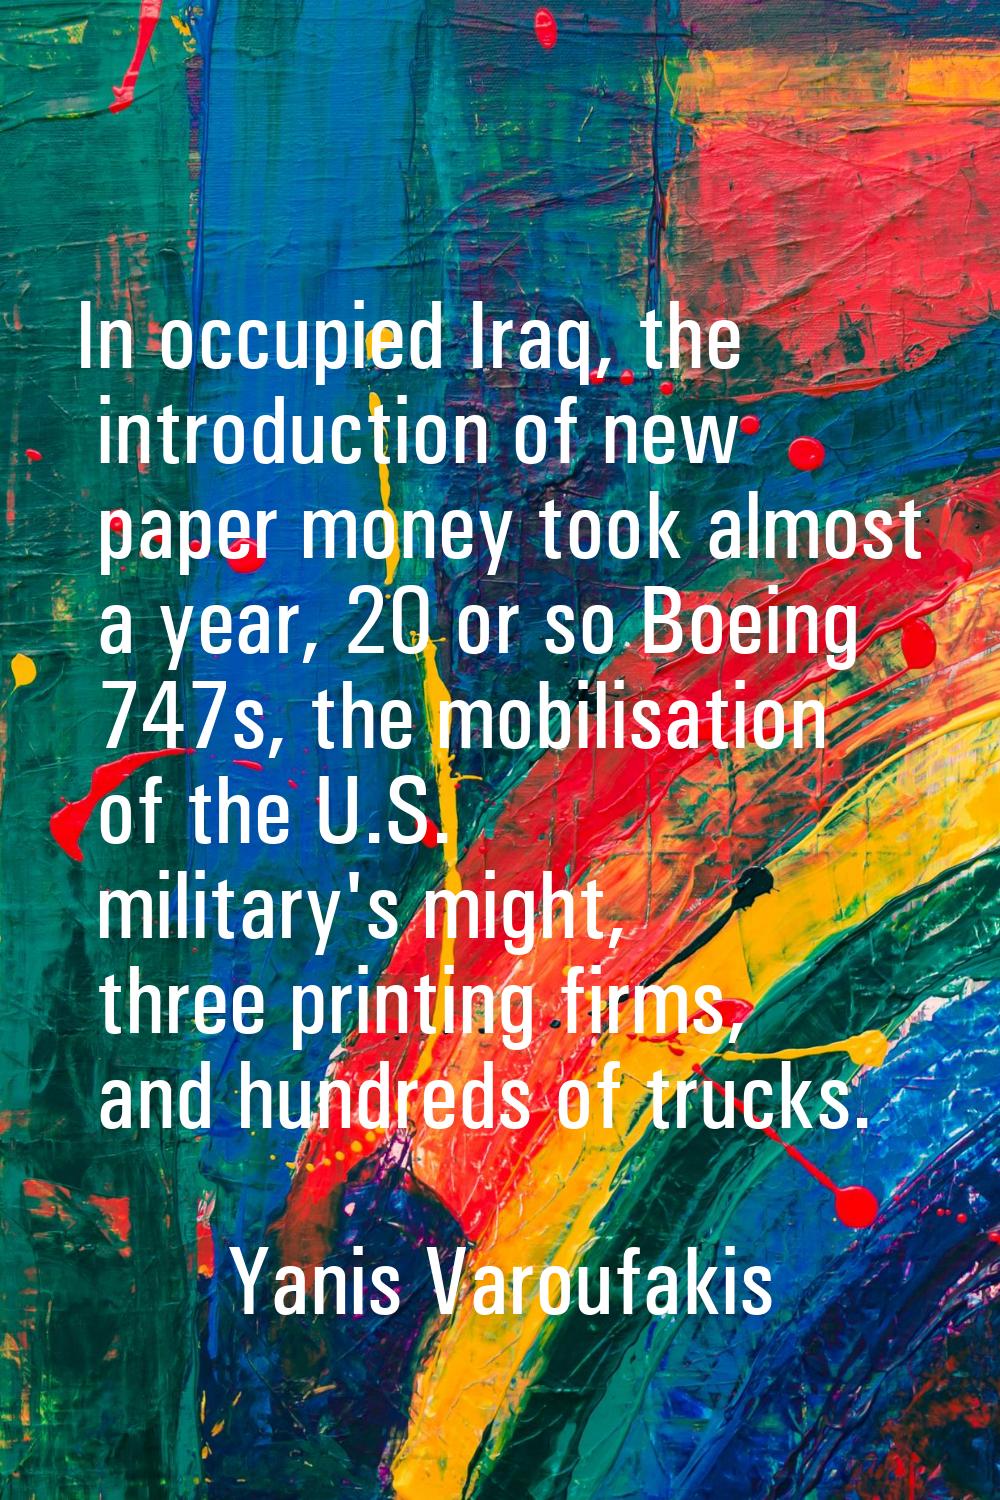 In occupied Iraq, the introduction of new paper money took almost a year, 20 or so Boeing 747s, the